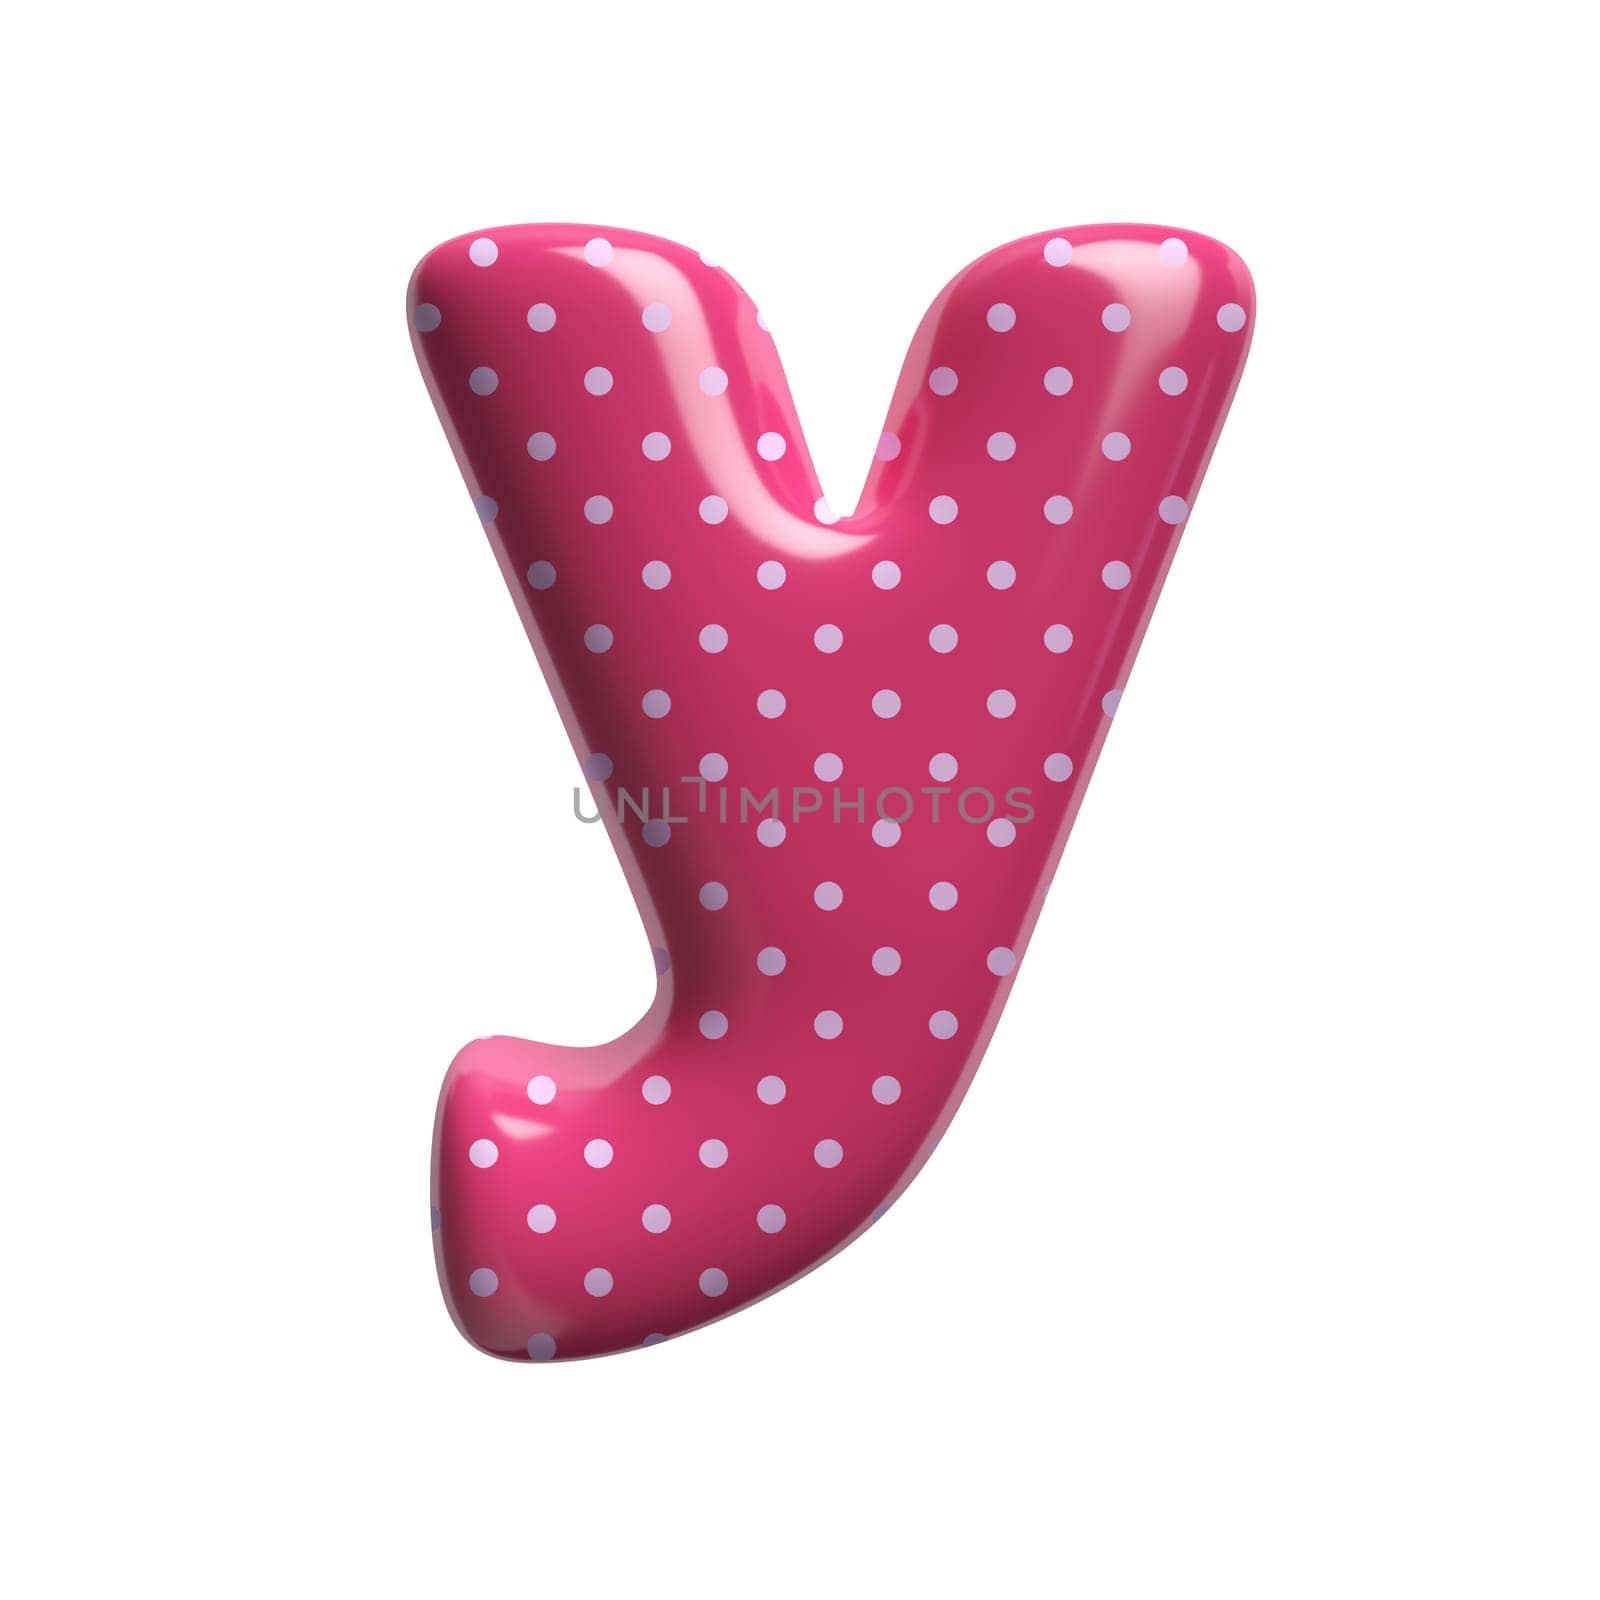 Polka dot letter Y - Small 3d pink retro font - Suitable for Fashion, retro design or decoration related subjects by chrisroll